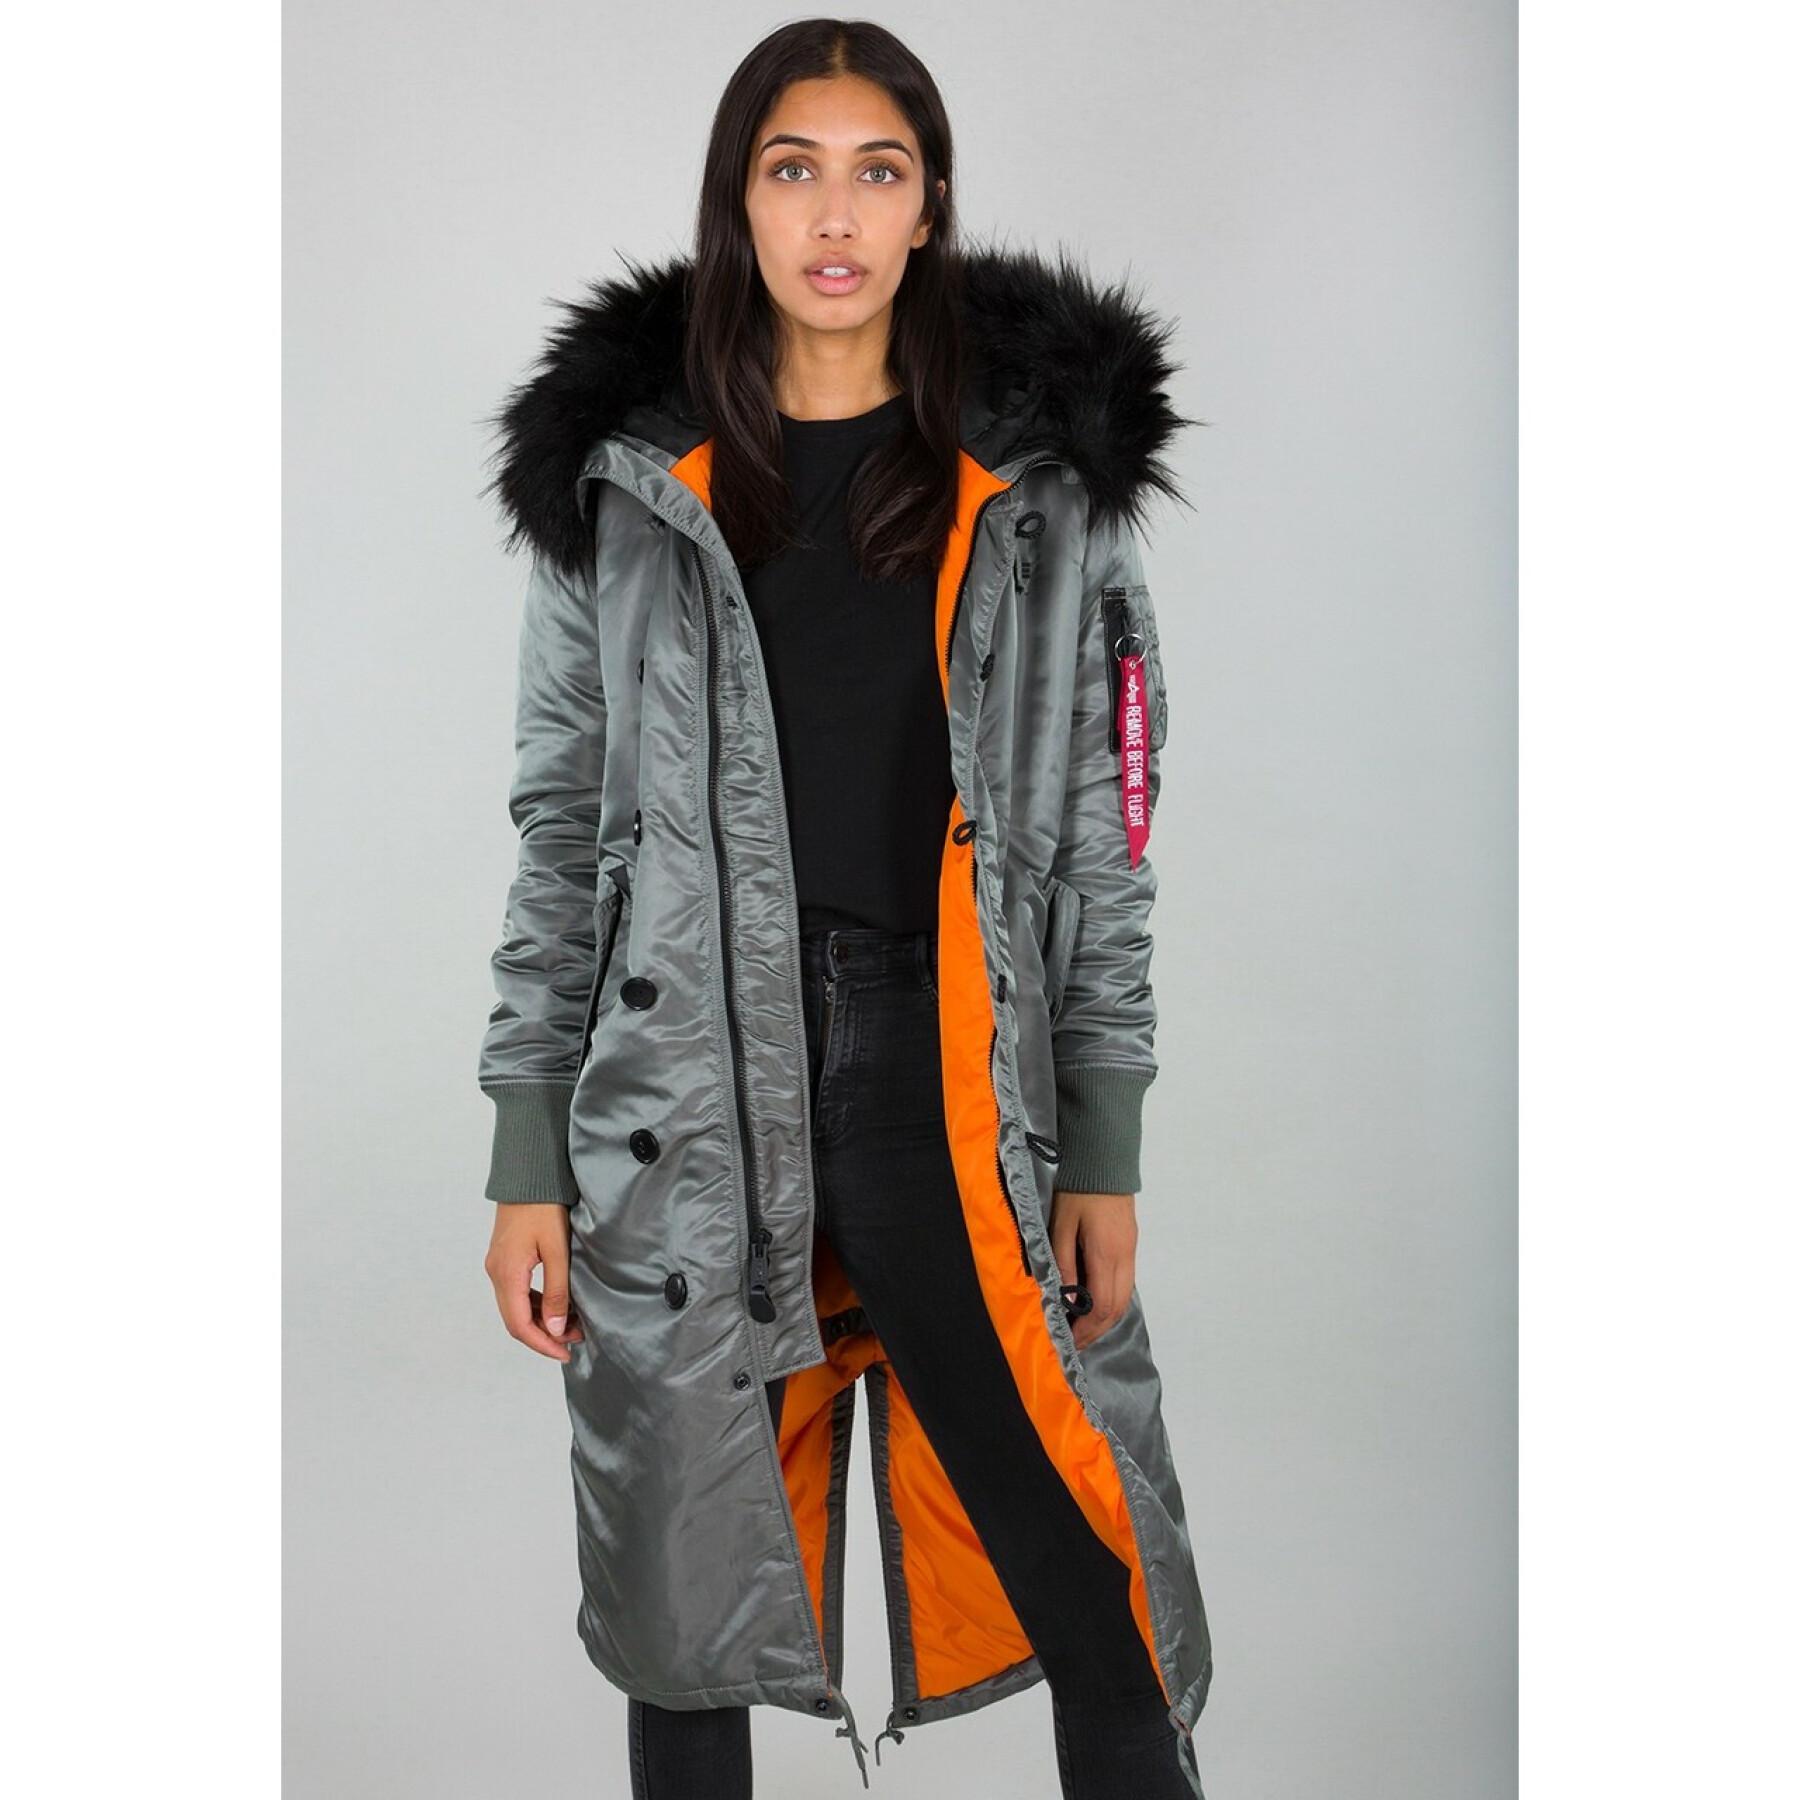 Women's parka Alpha Industries Fishtail - Down jackets and coats - Winter -  Lifestyle